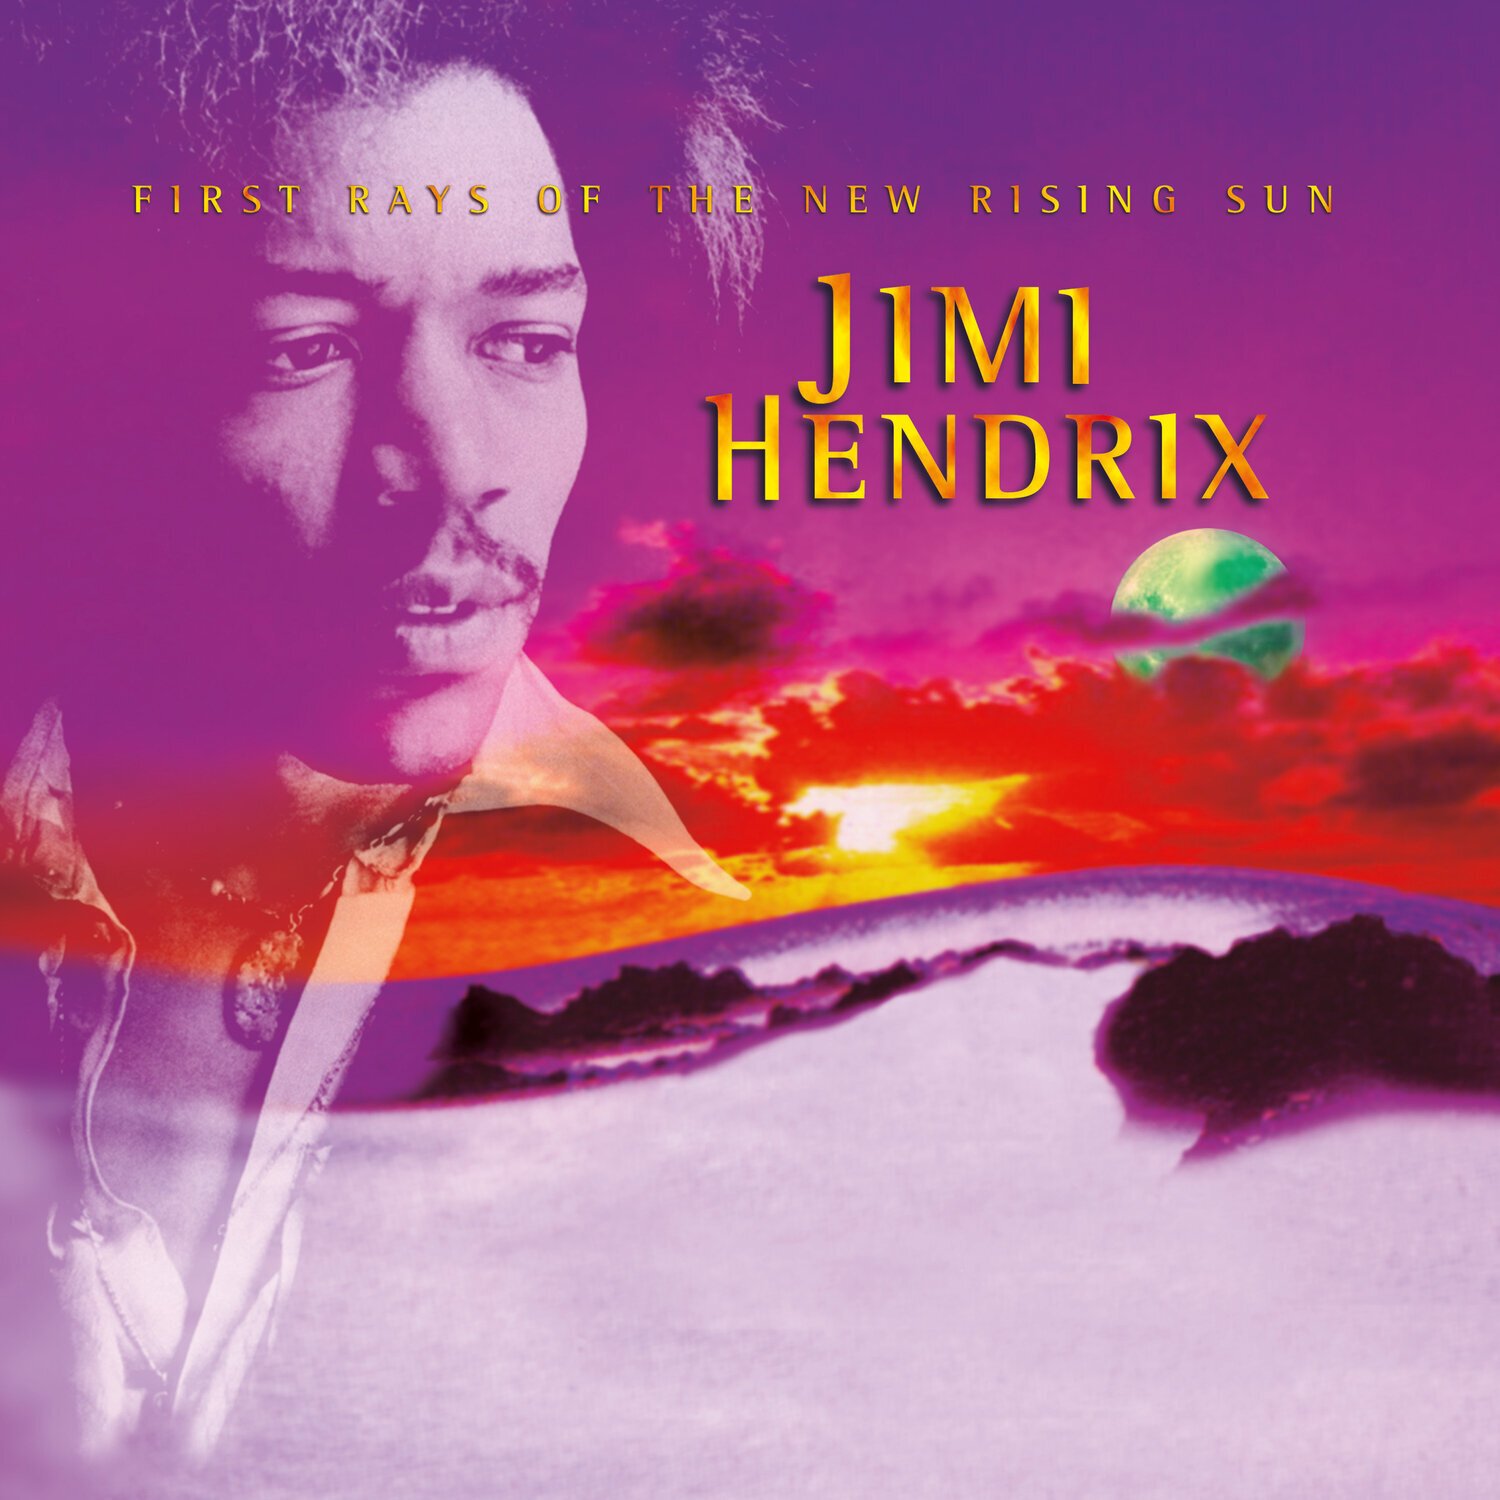 Vinyl Record Jimi Hendrix - First Rays Of The New Rising Sun (Remastered) (2 LP)